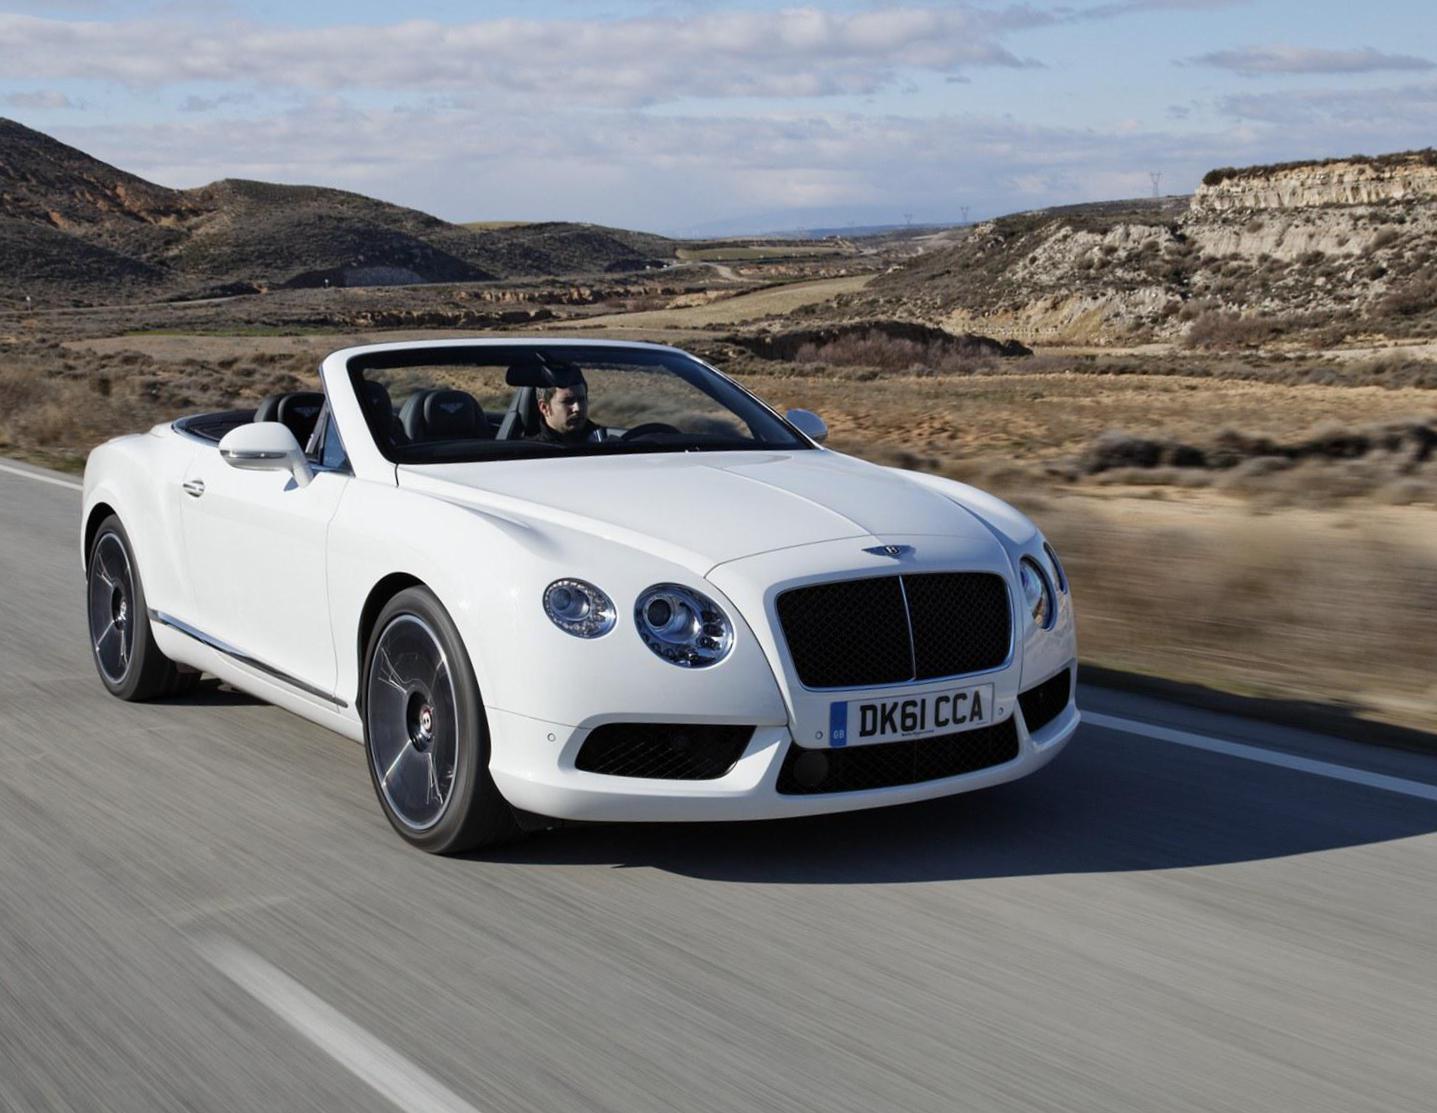 Continental GTC V8 Bentley approved 2012